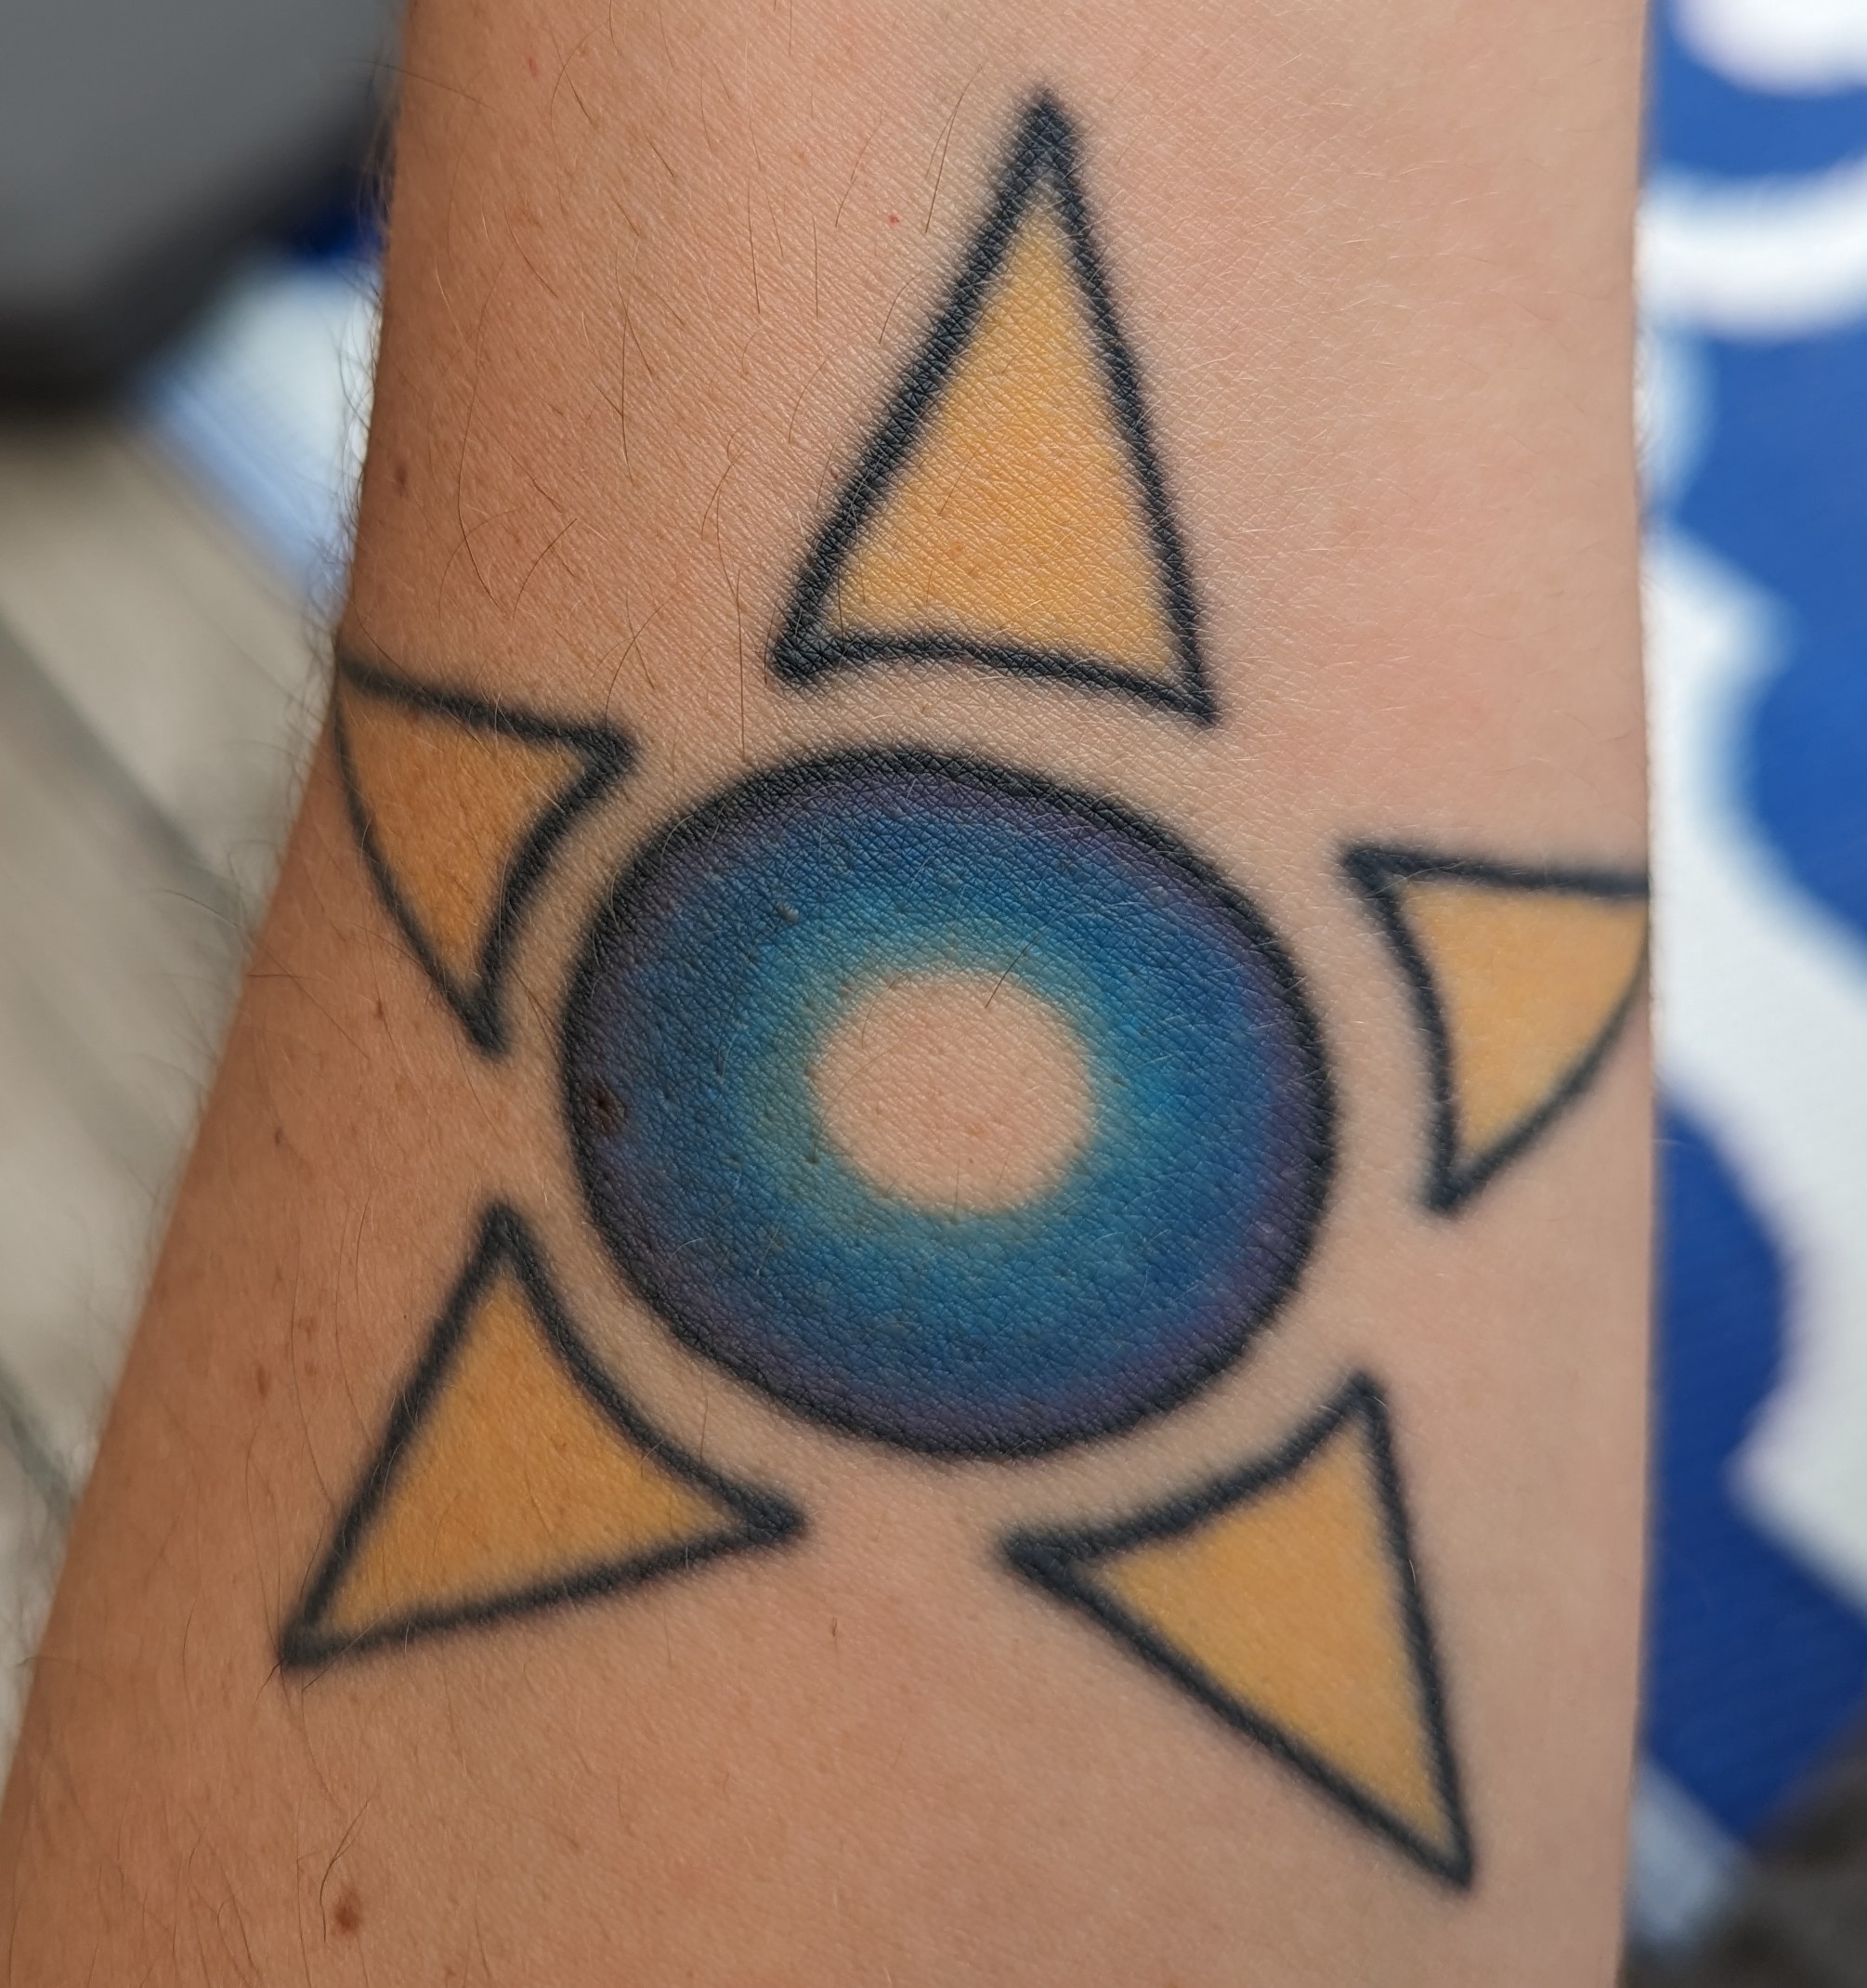 A tattoo of a thich colourful circle with beams of light coming from it making a star shape.